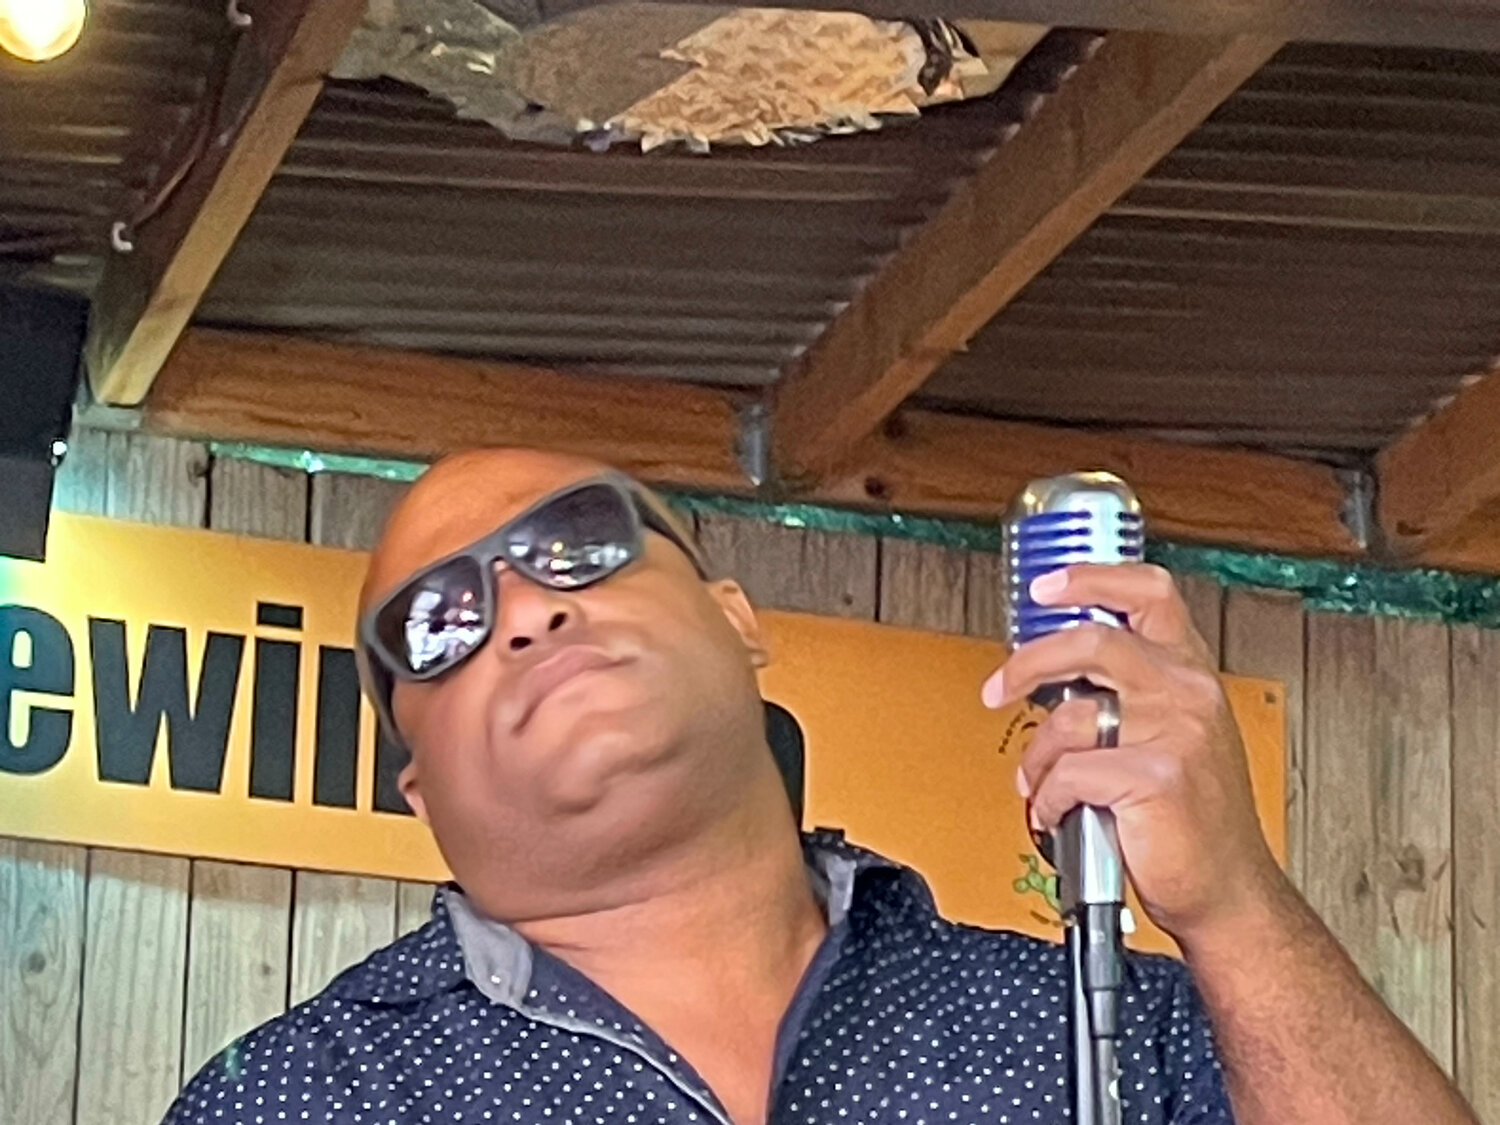 Michael Matison was feeling the blues on a recent Sunday afternoon at Kaktus Brewing in Bernalillo. The brewery is sponsoring a two-day music event June 17-18. (T.S. Last/Sandoval Signpost)